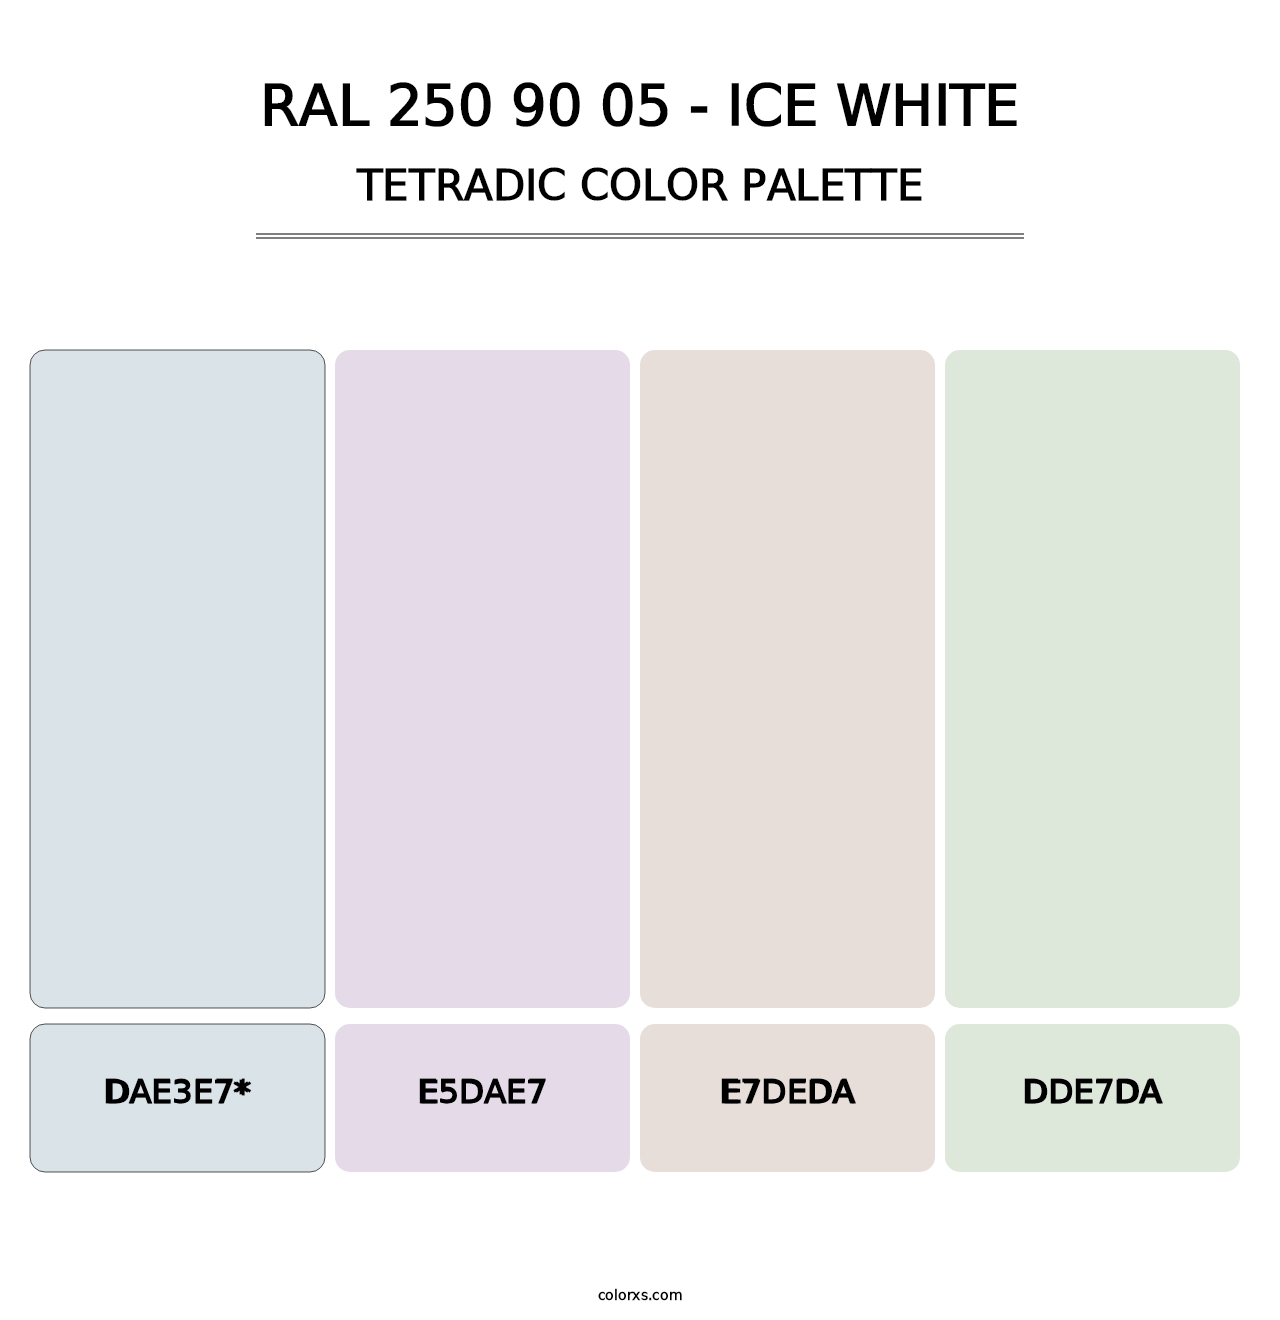 RAL 250 90 05 - Ice White - Tetradic Color Palette